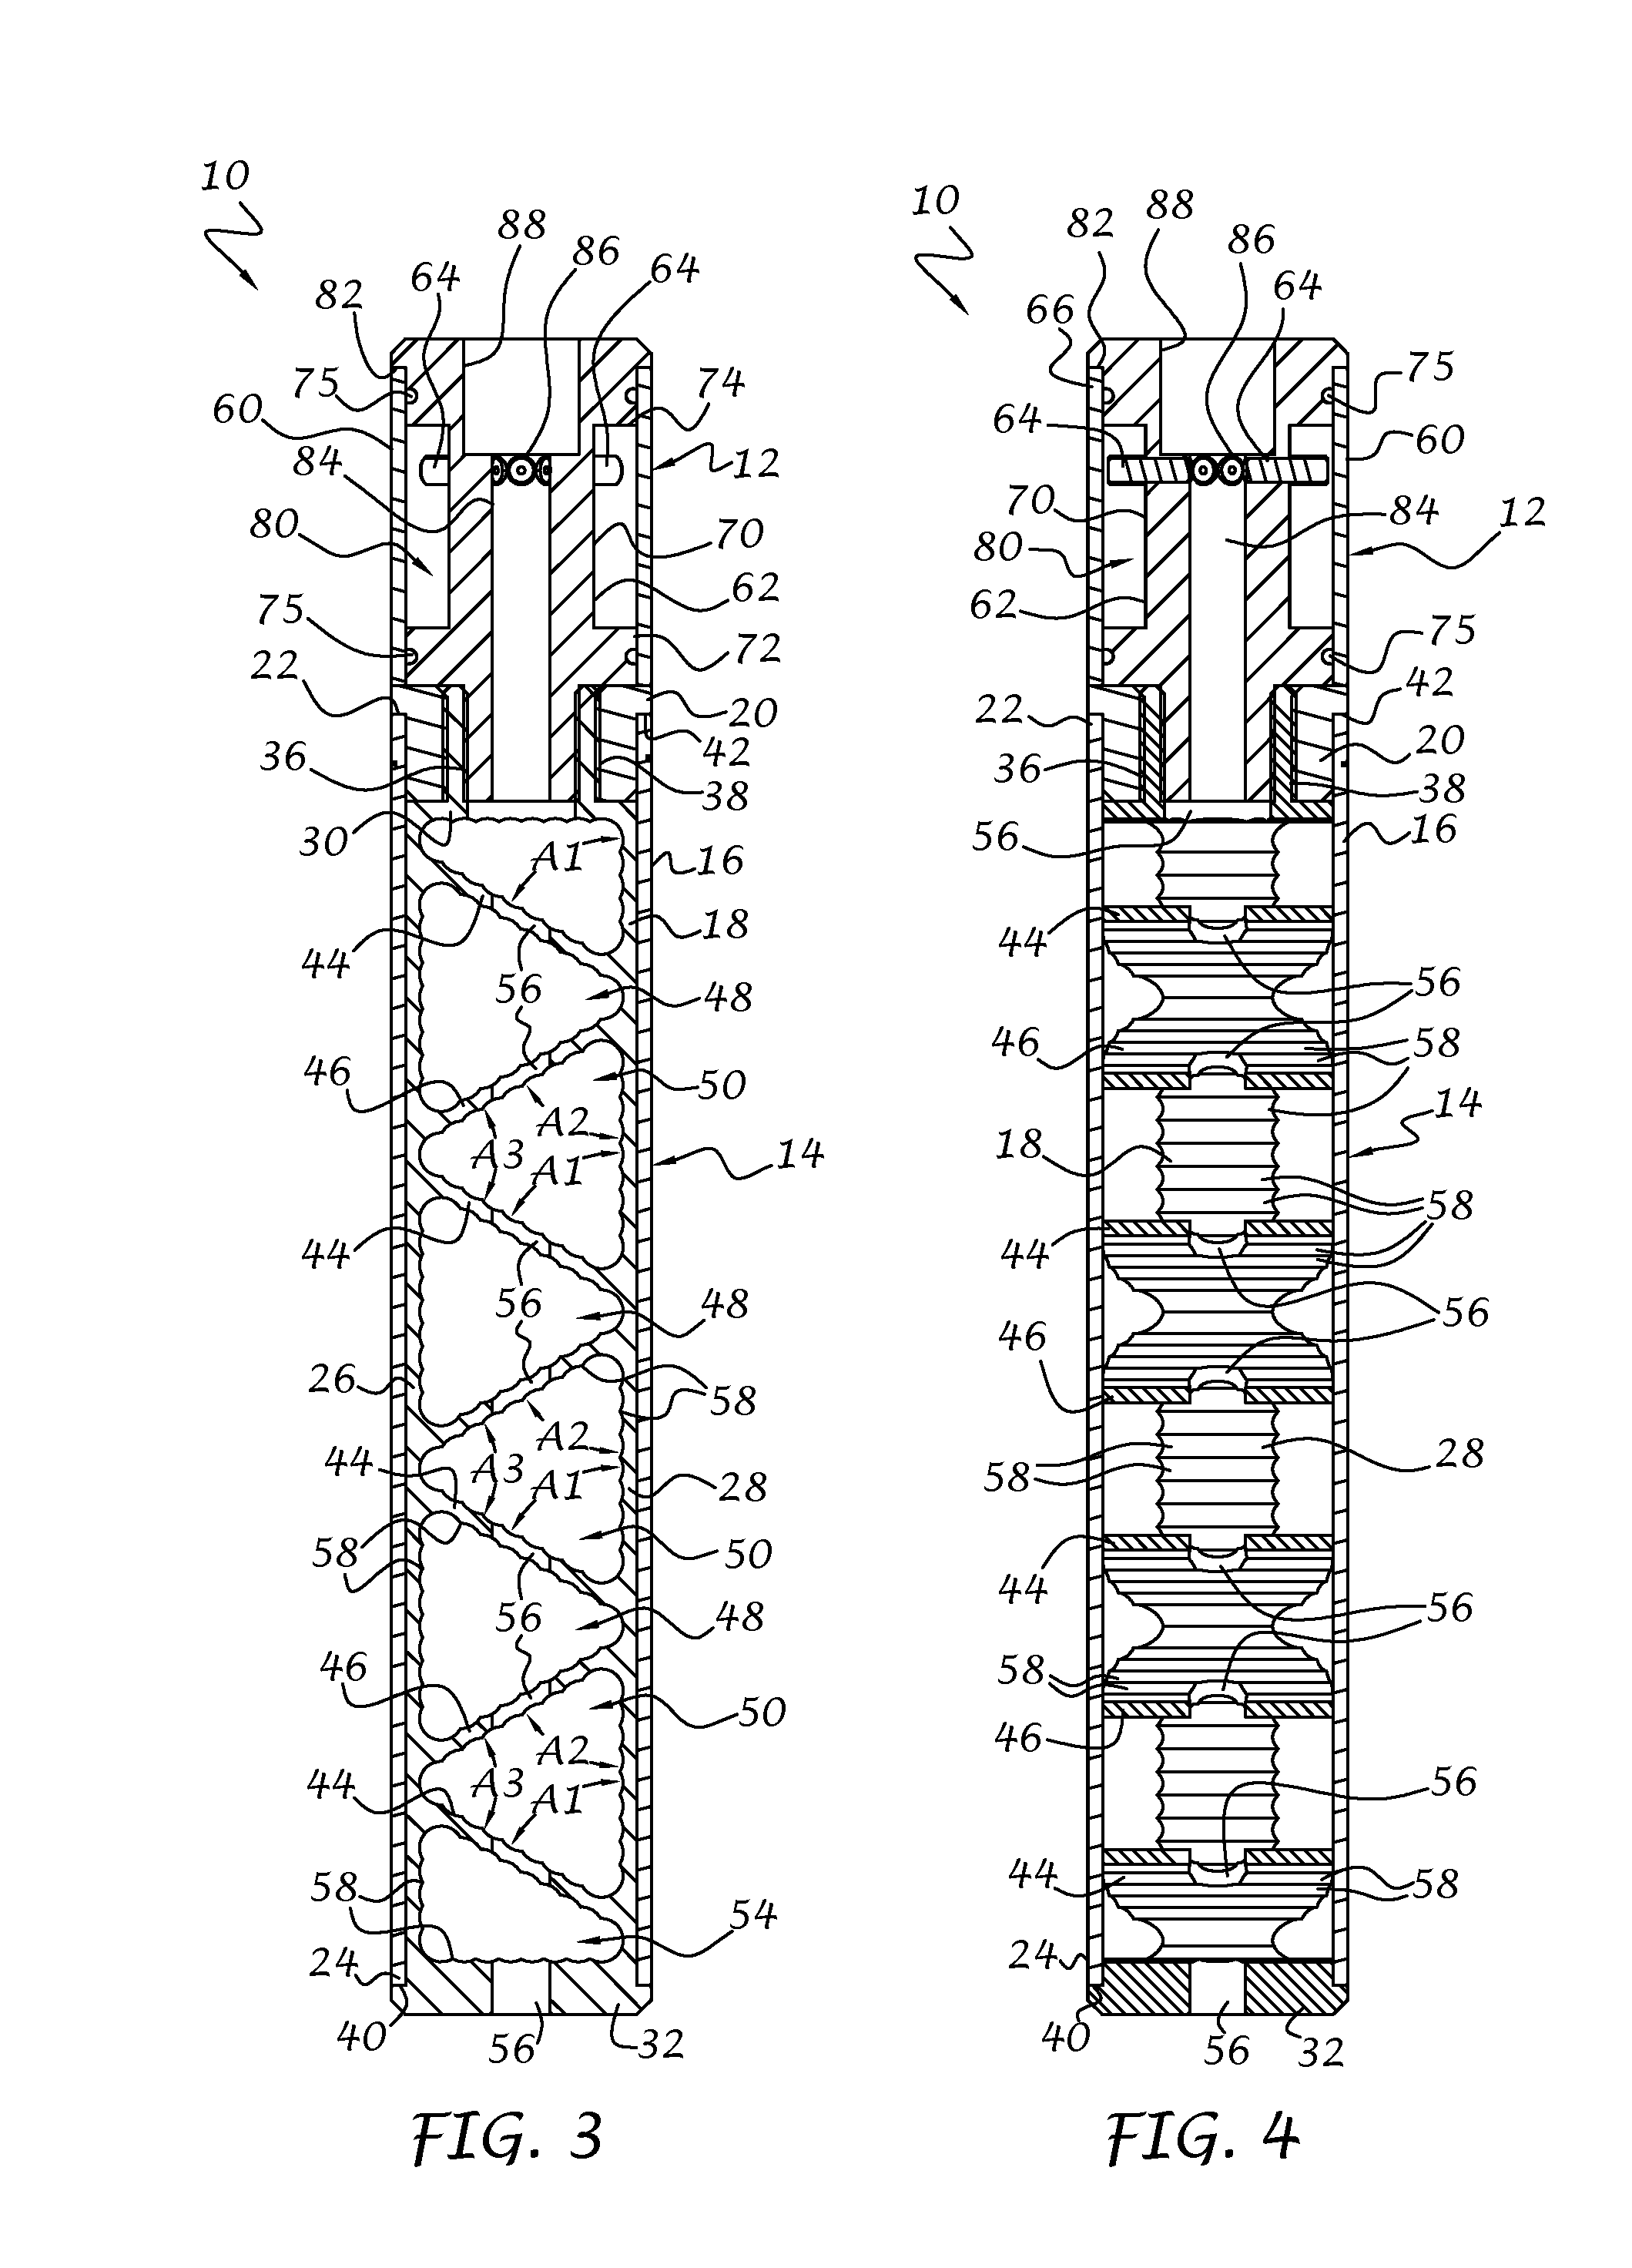 Firearm Suppressor and Injector Assembly